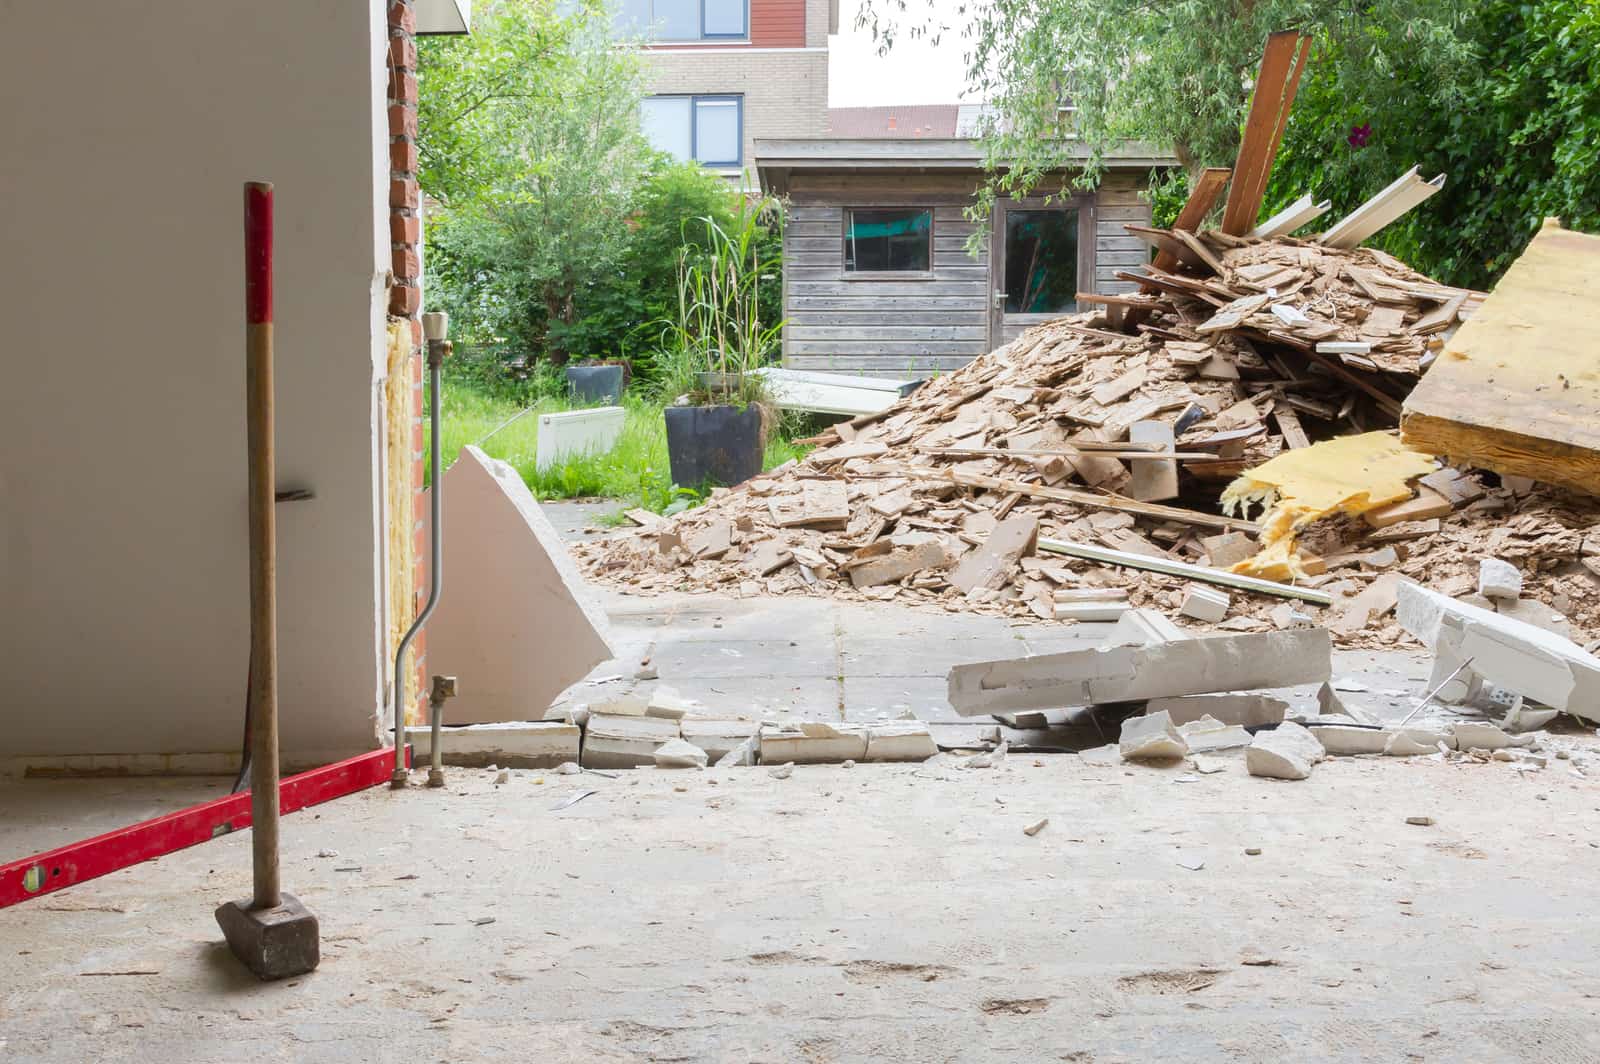 Demolition is one of the first steps to remodel a kitchen